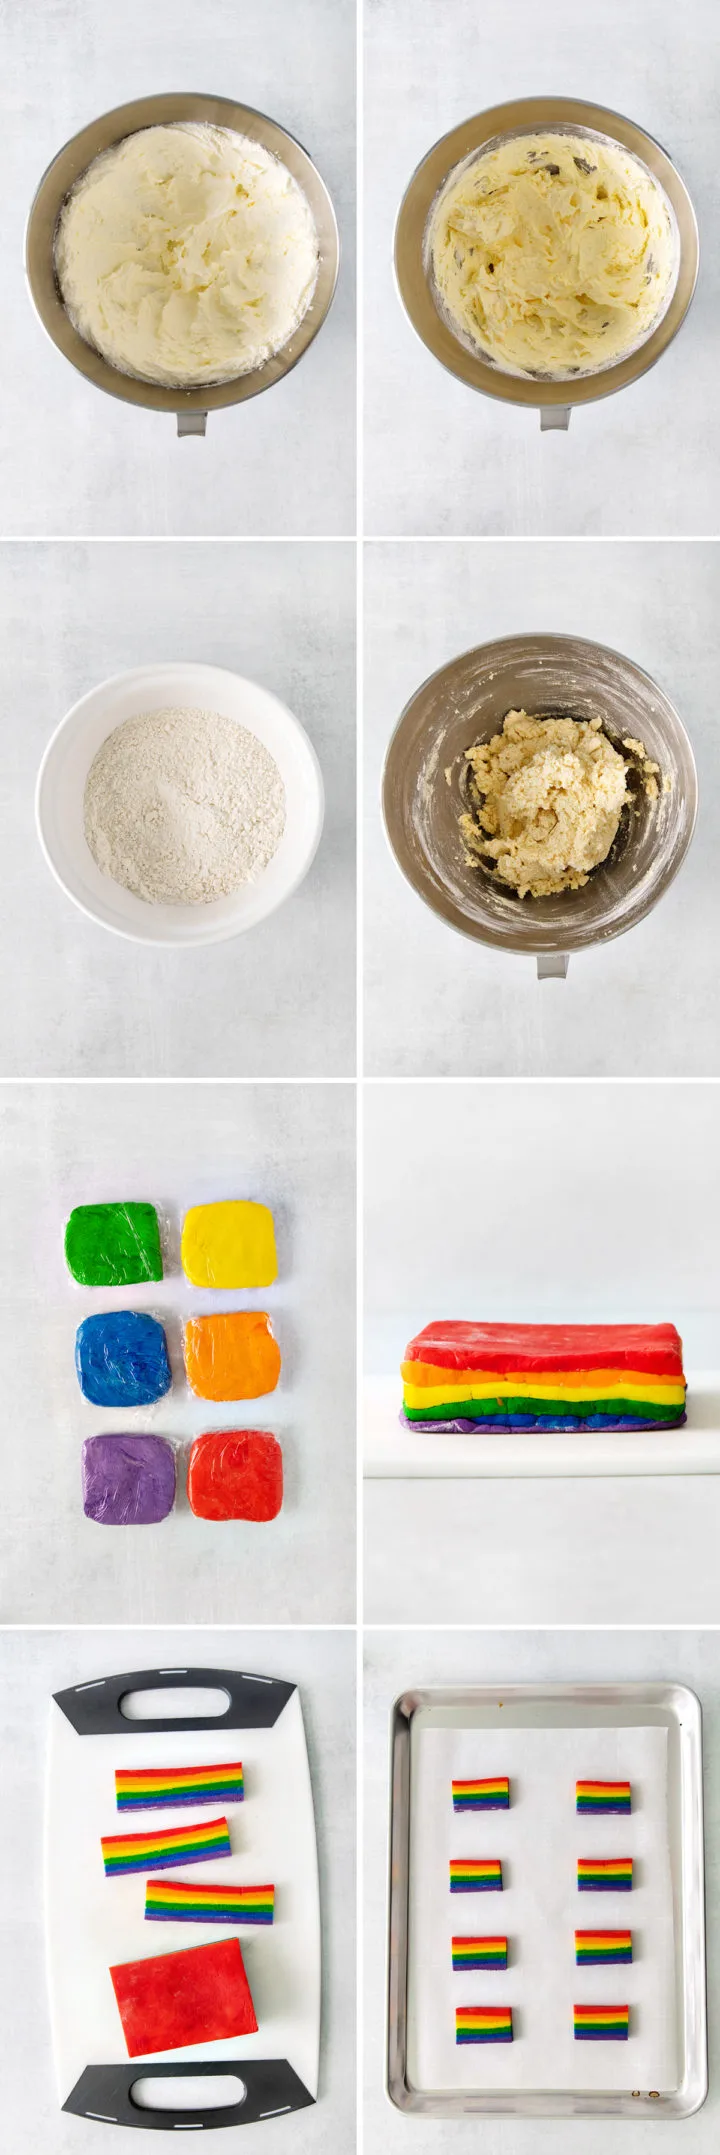 step by step photos showing how to make rainbow sugar cookie dough for baking St. Patrick's Day Cookies